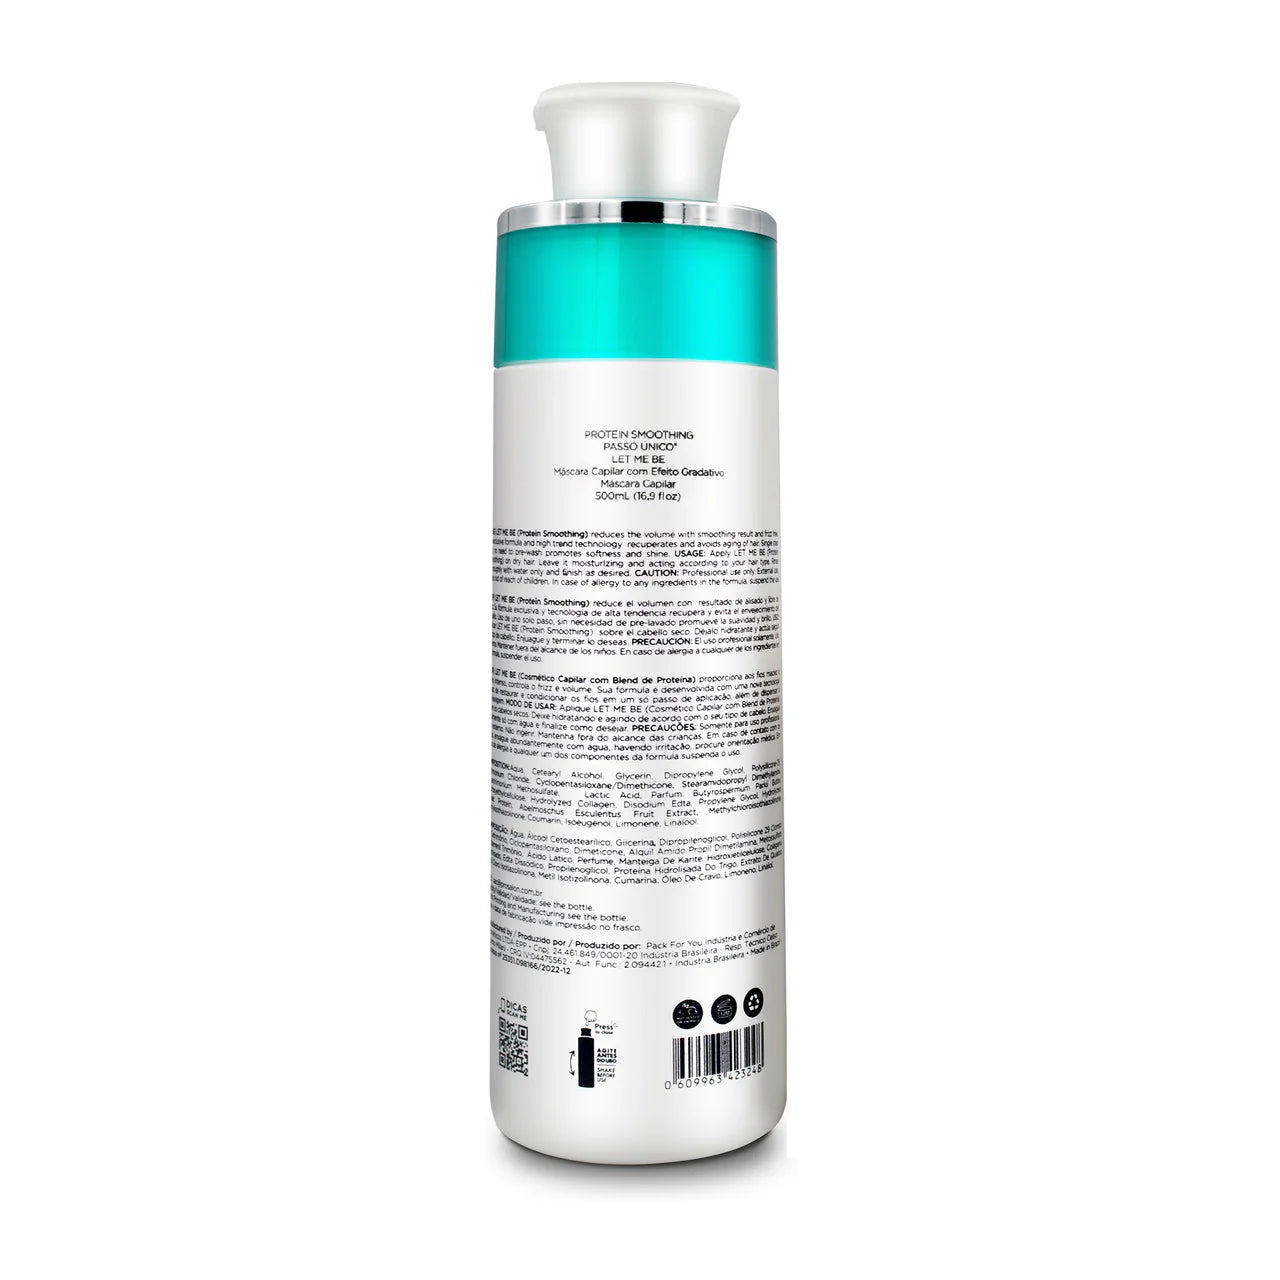 Let me be, Protein Smoothing, Restoring Conditioner For Hair, 500ml